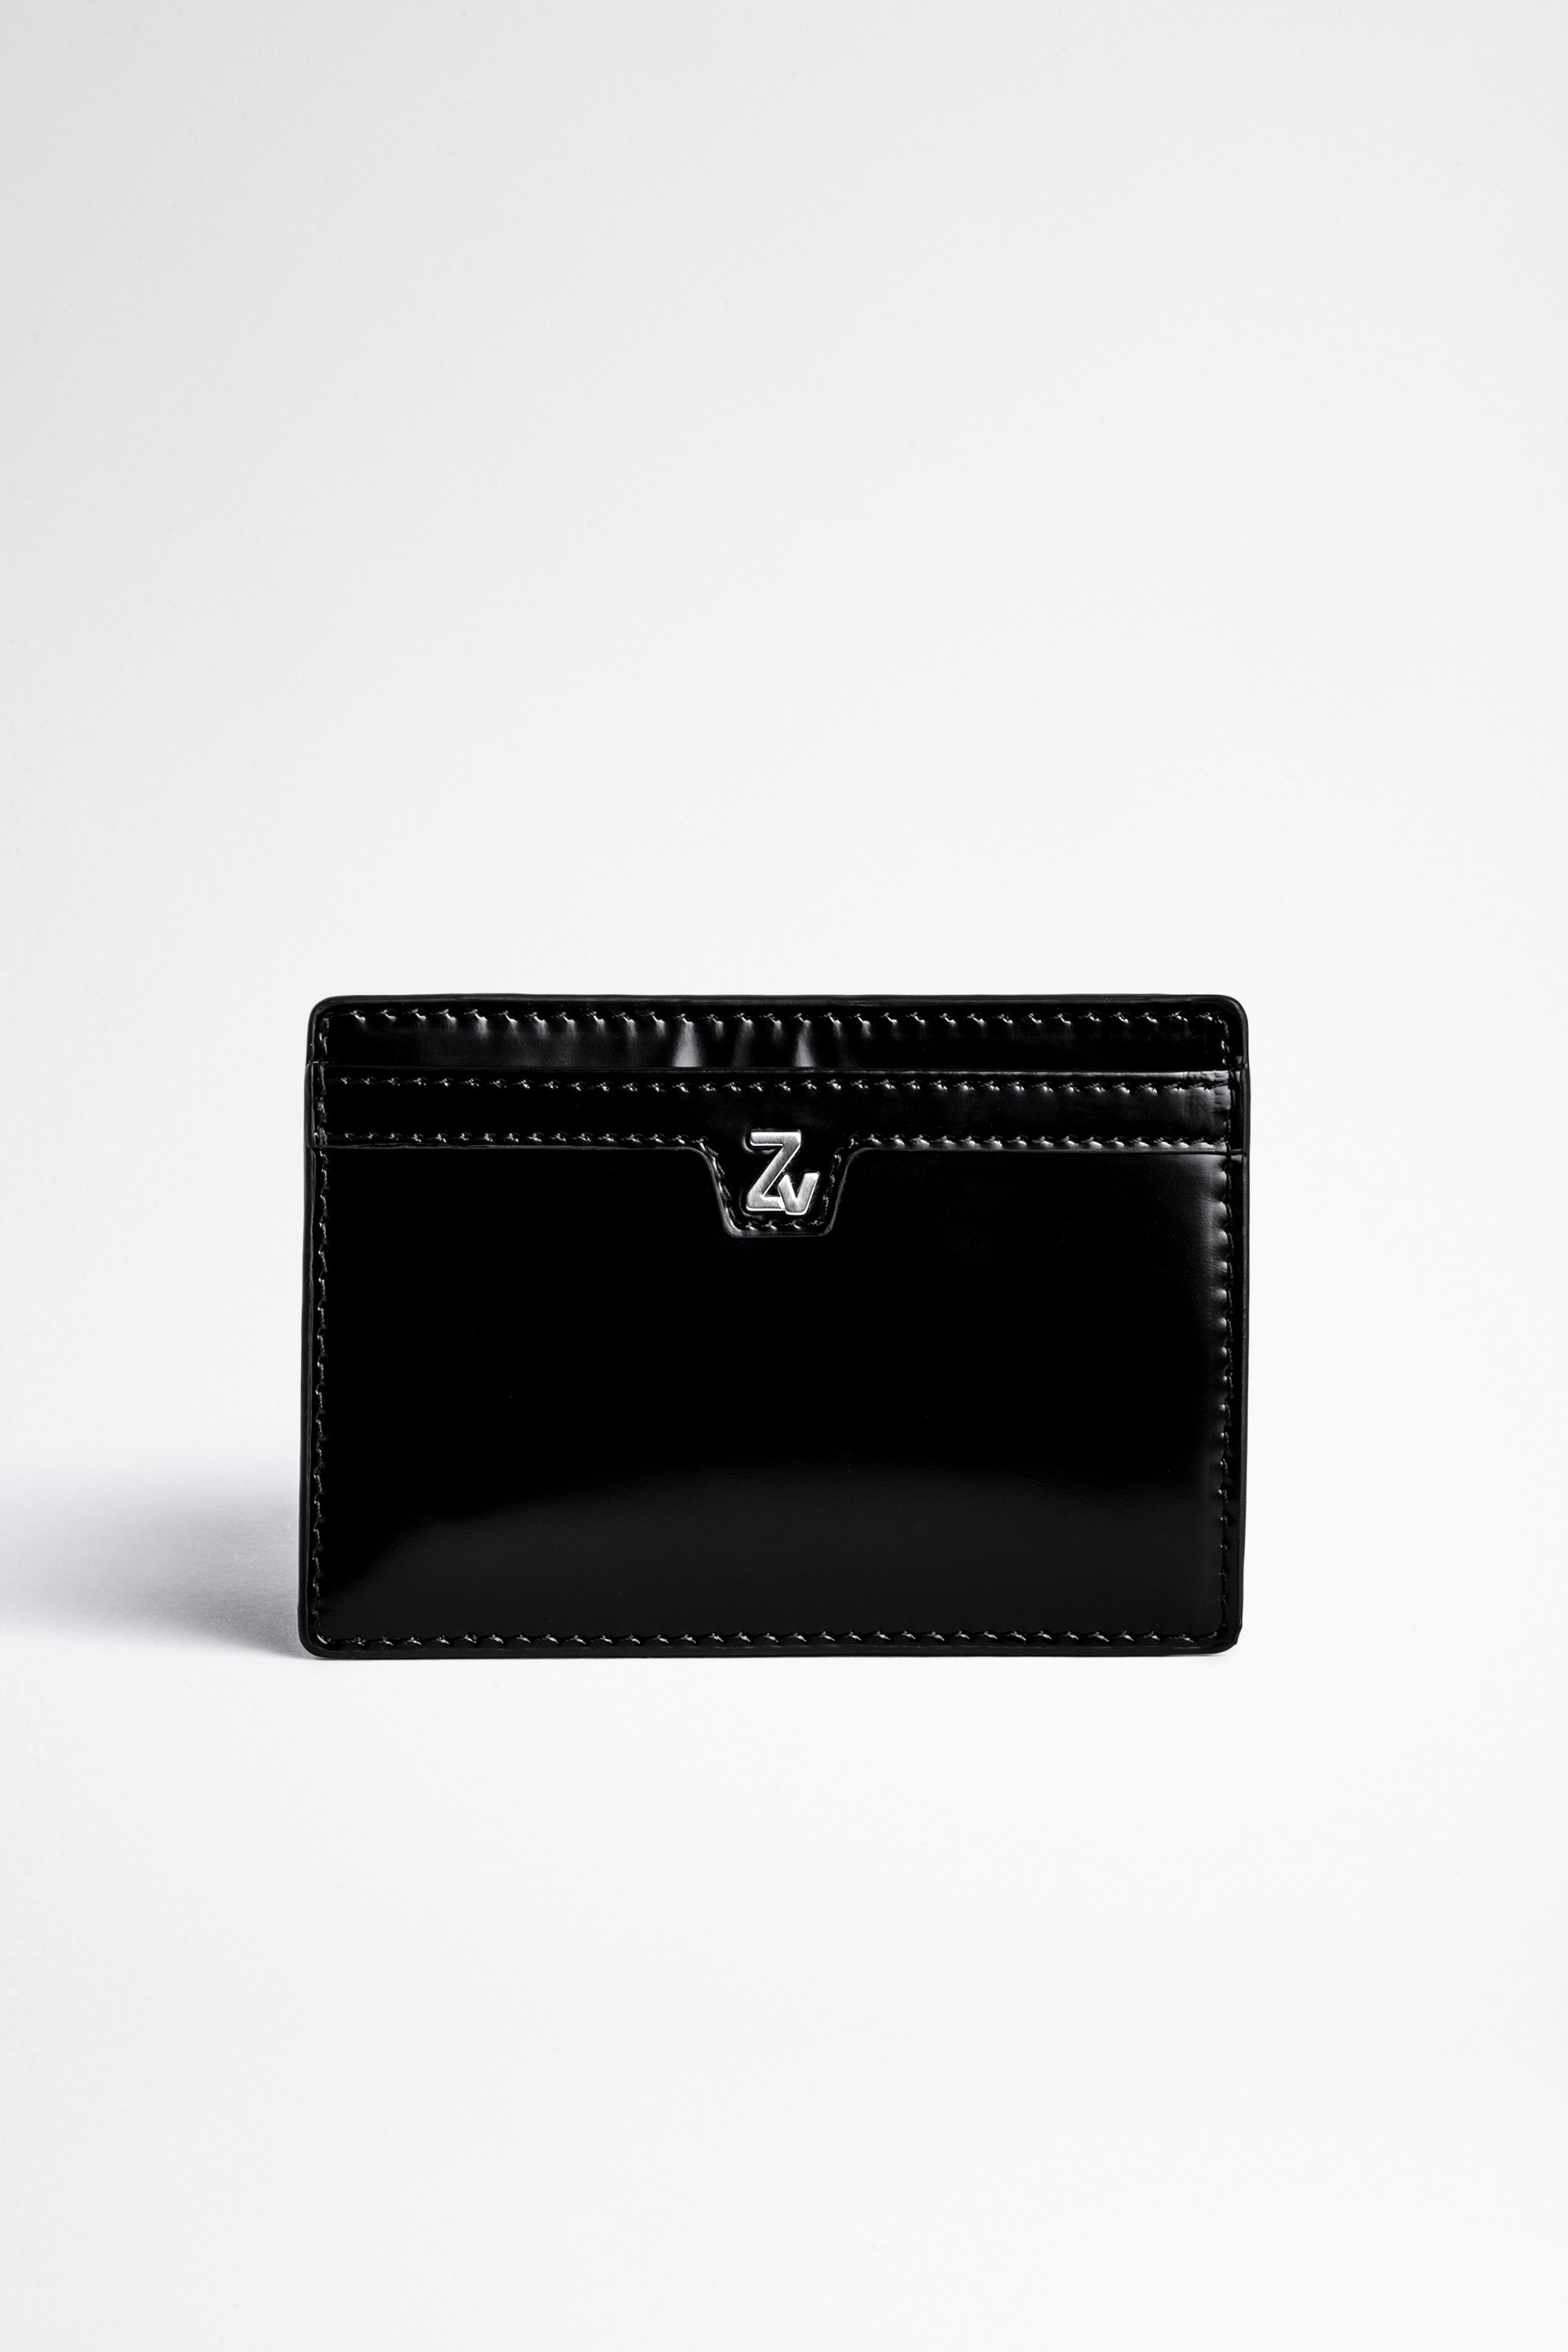 ZV Initiale Niels レザー財布 Men's black glossy leather card holder